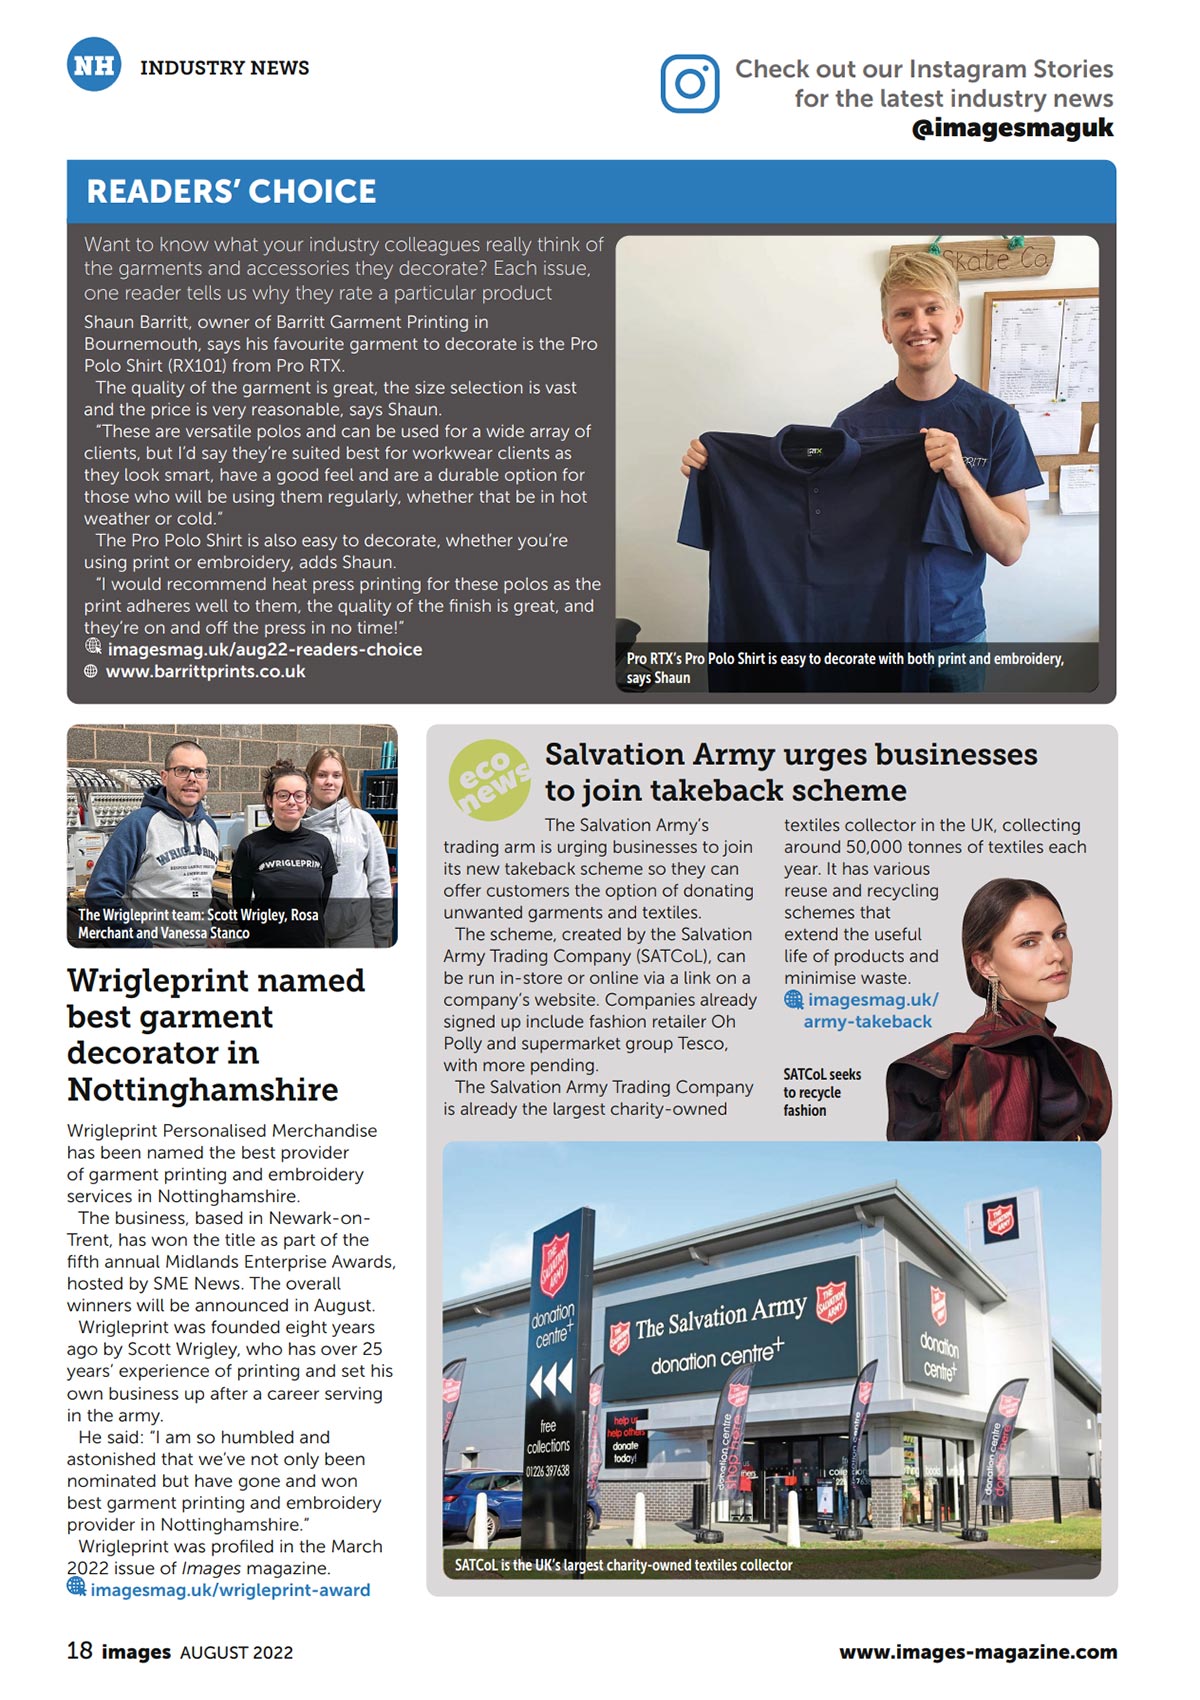 Images Magazine August 2022 Article on Barritt Garment Printing's Favourite GArment to Decorate the Pro RTX Pro Polo Shirt